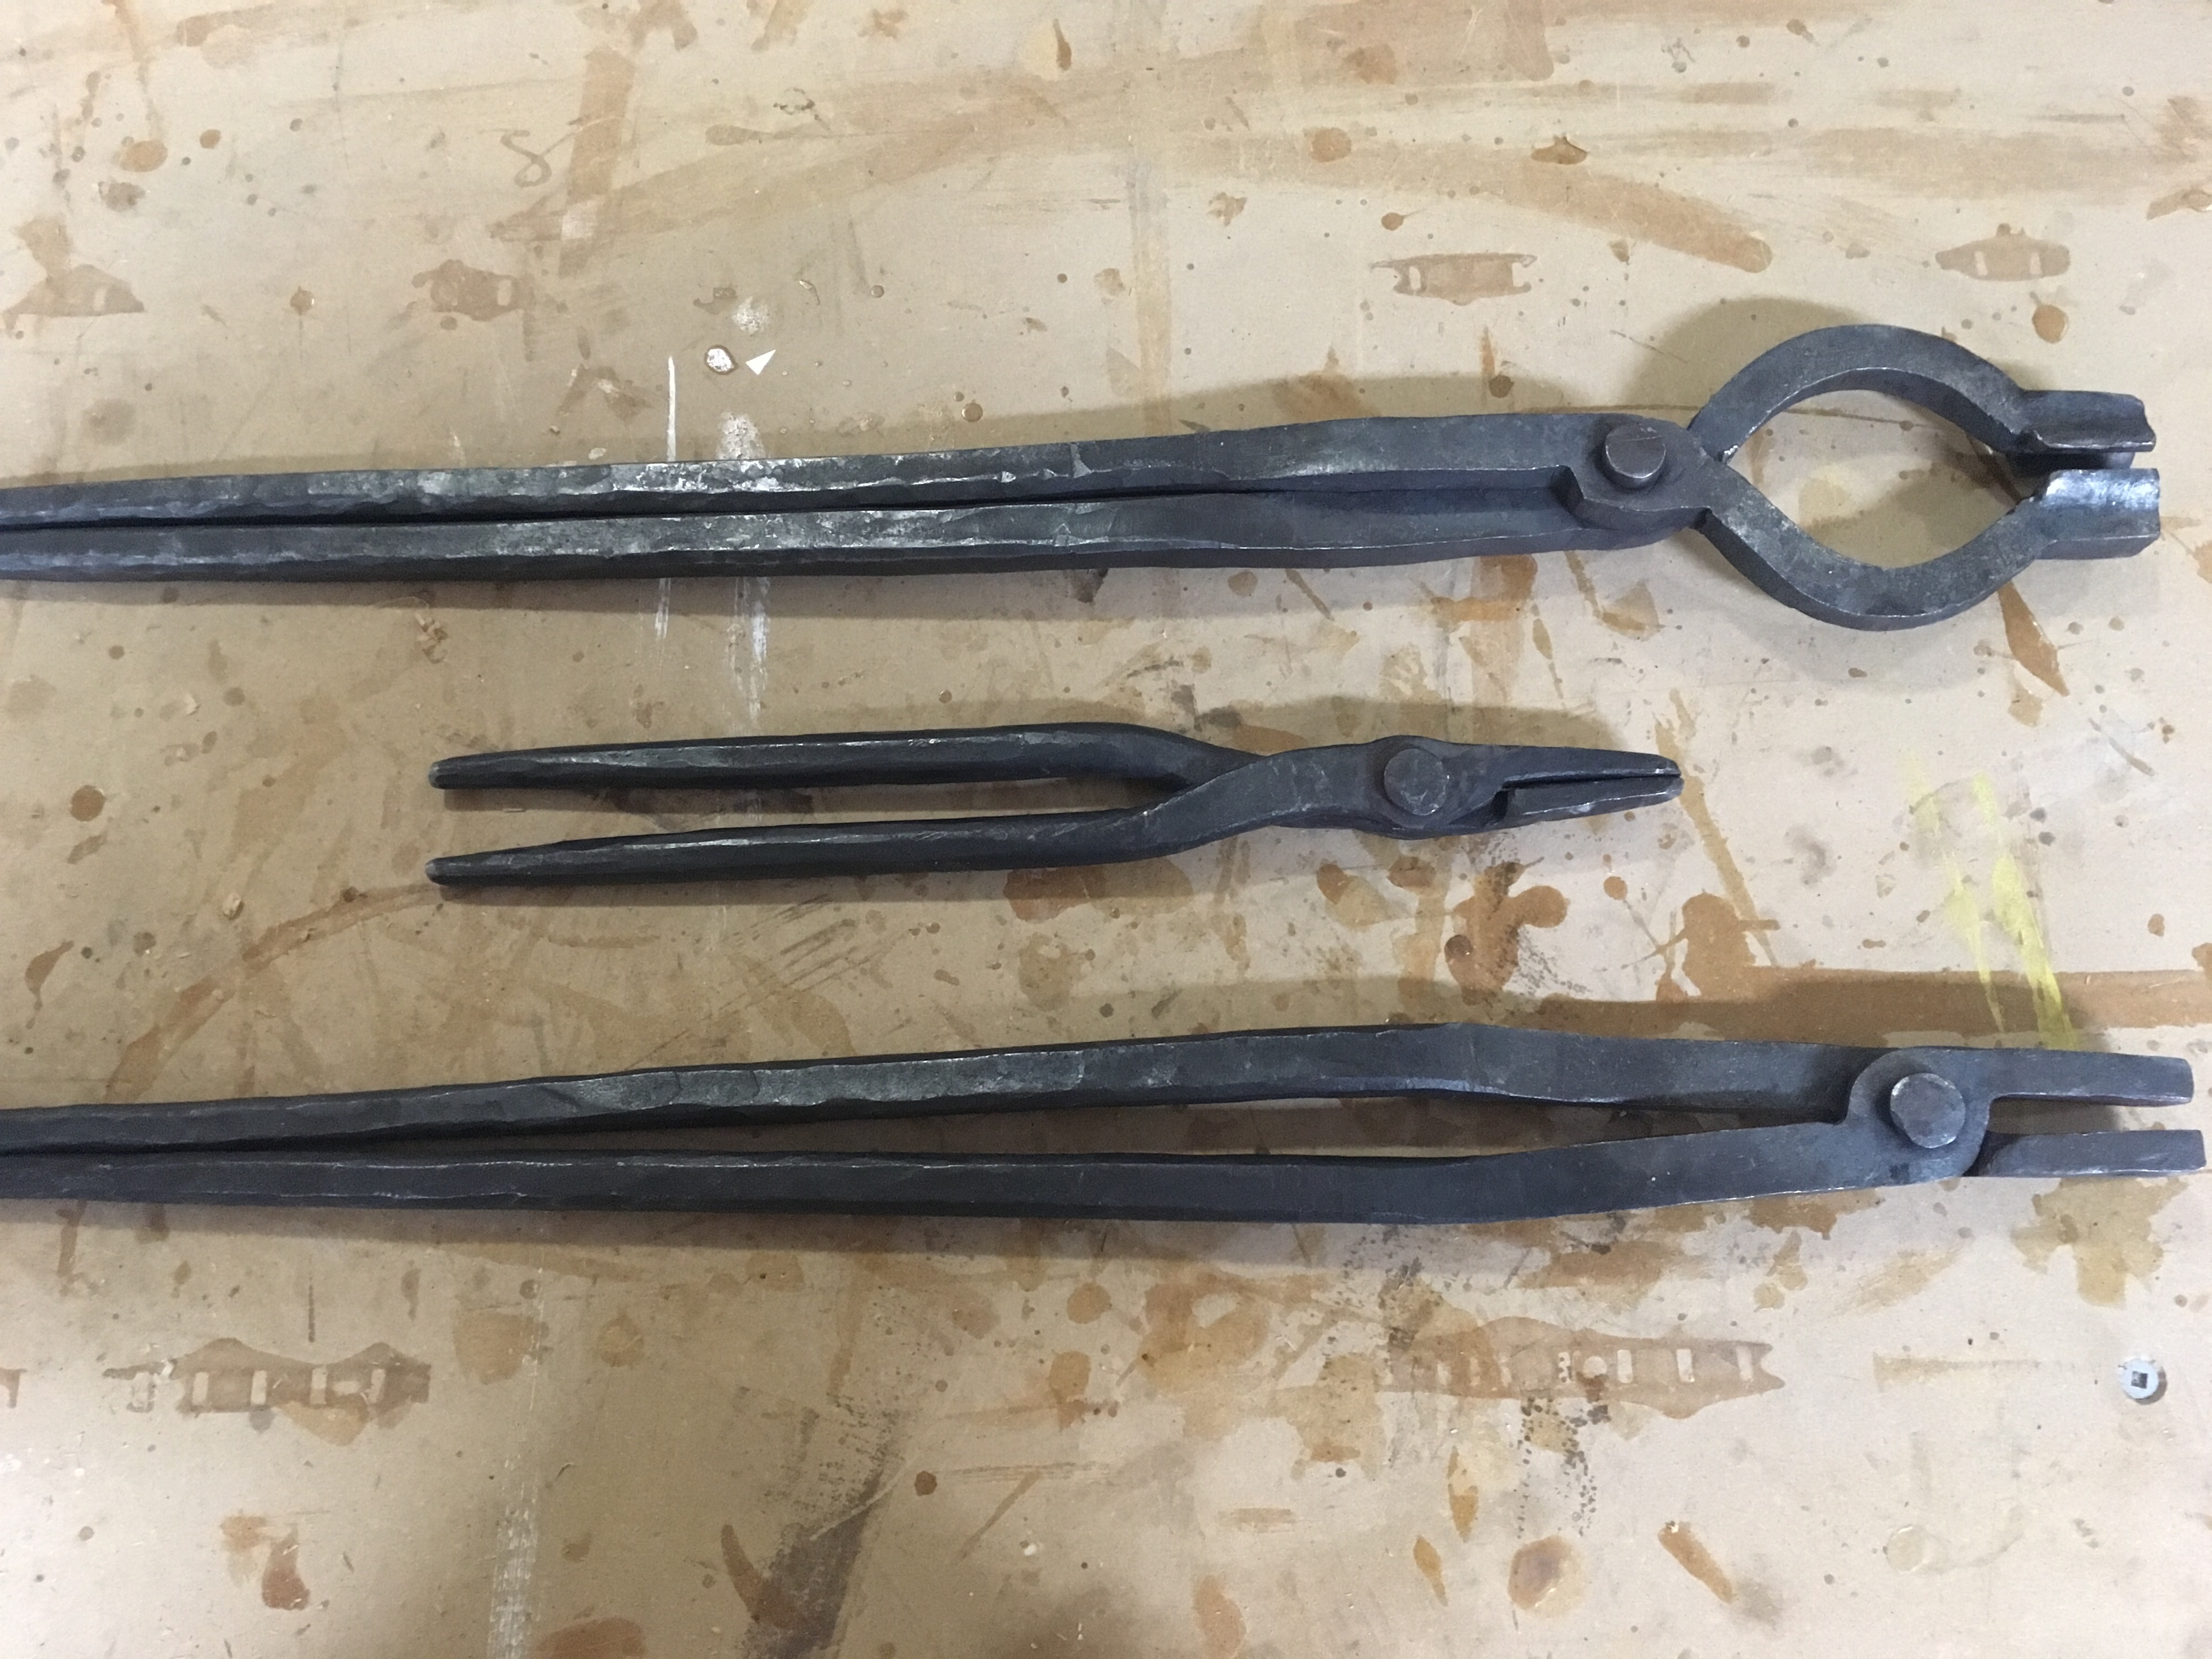 Tong progression of a beginner hobby smith - Tongs - I Forge Iron